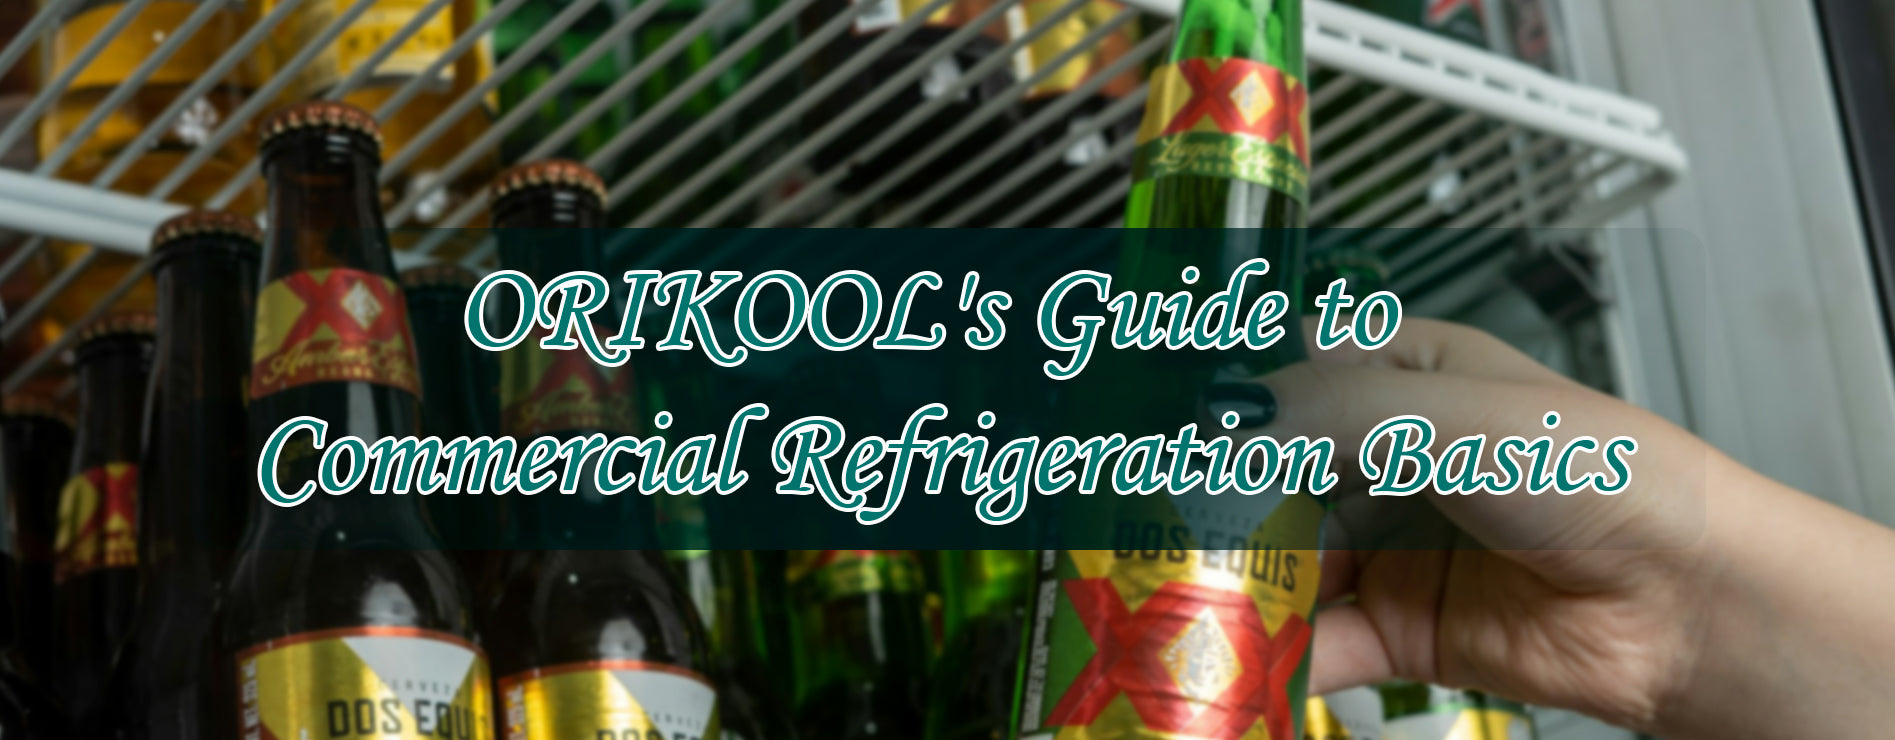 ORIKOOL's Guide to Commercial Refrigeration Basics